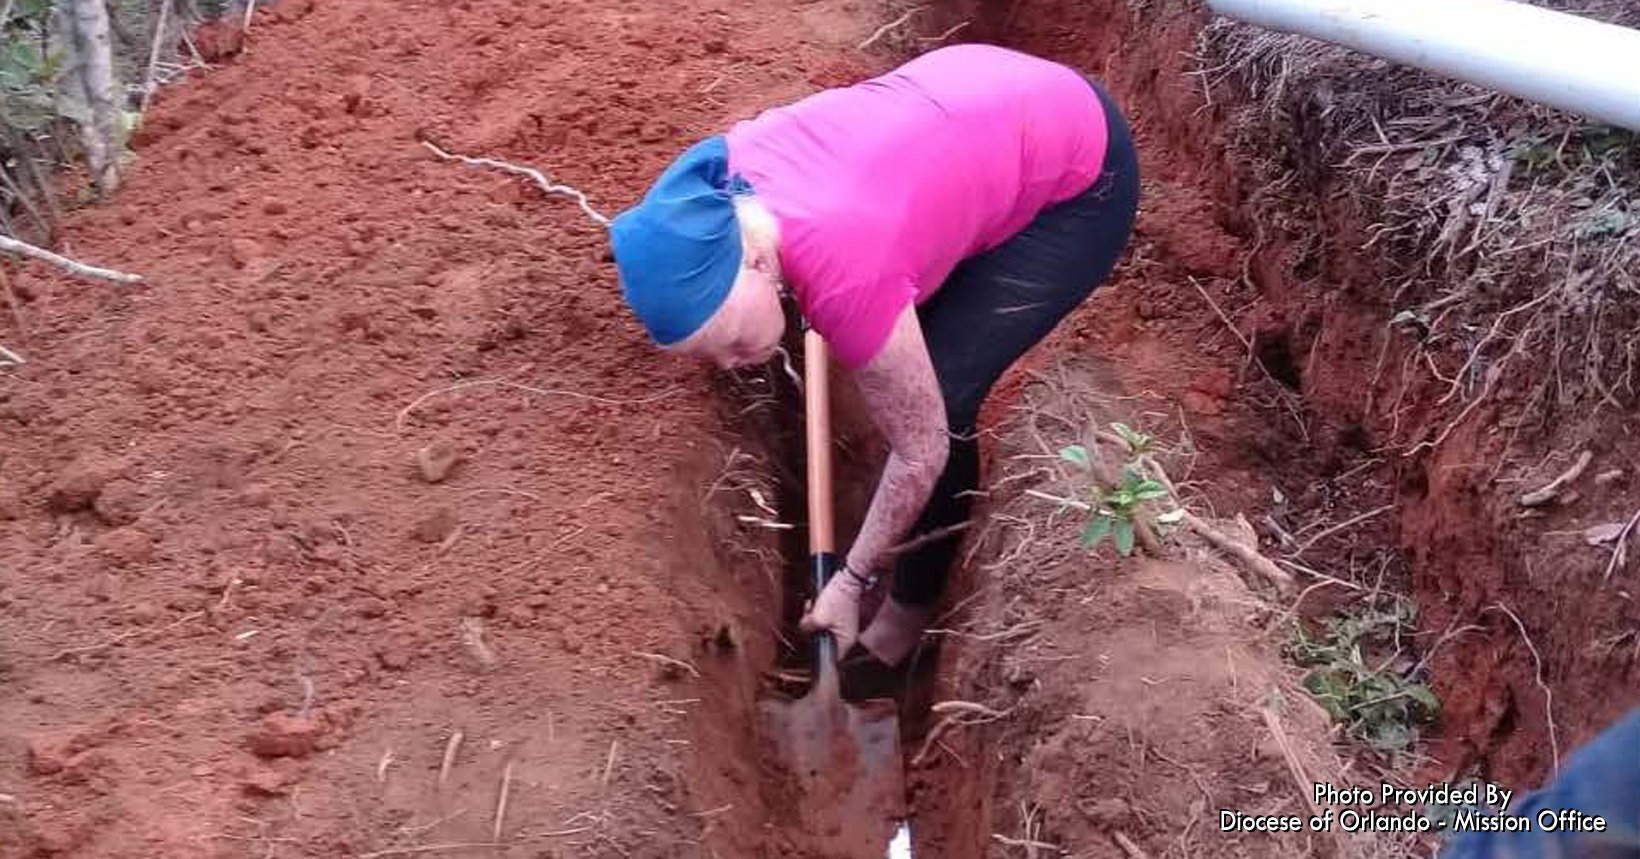 One of the elder women is using a shovel to better the trench that was made for the pipeline. She is working hard like everyone else around her.